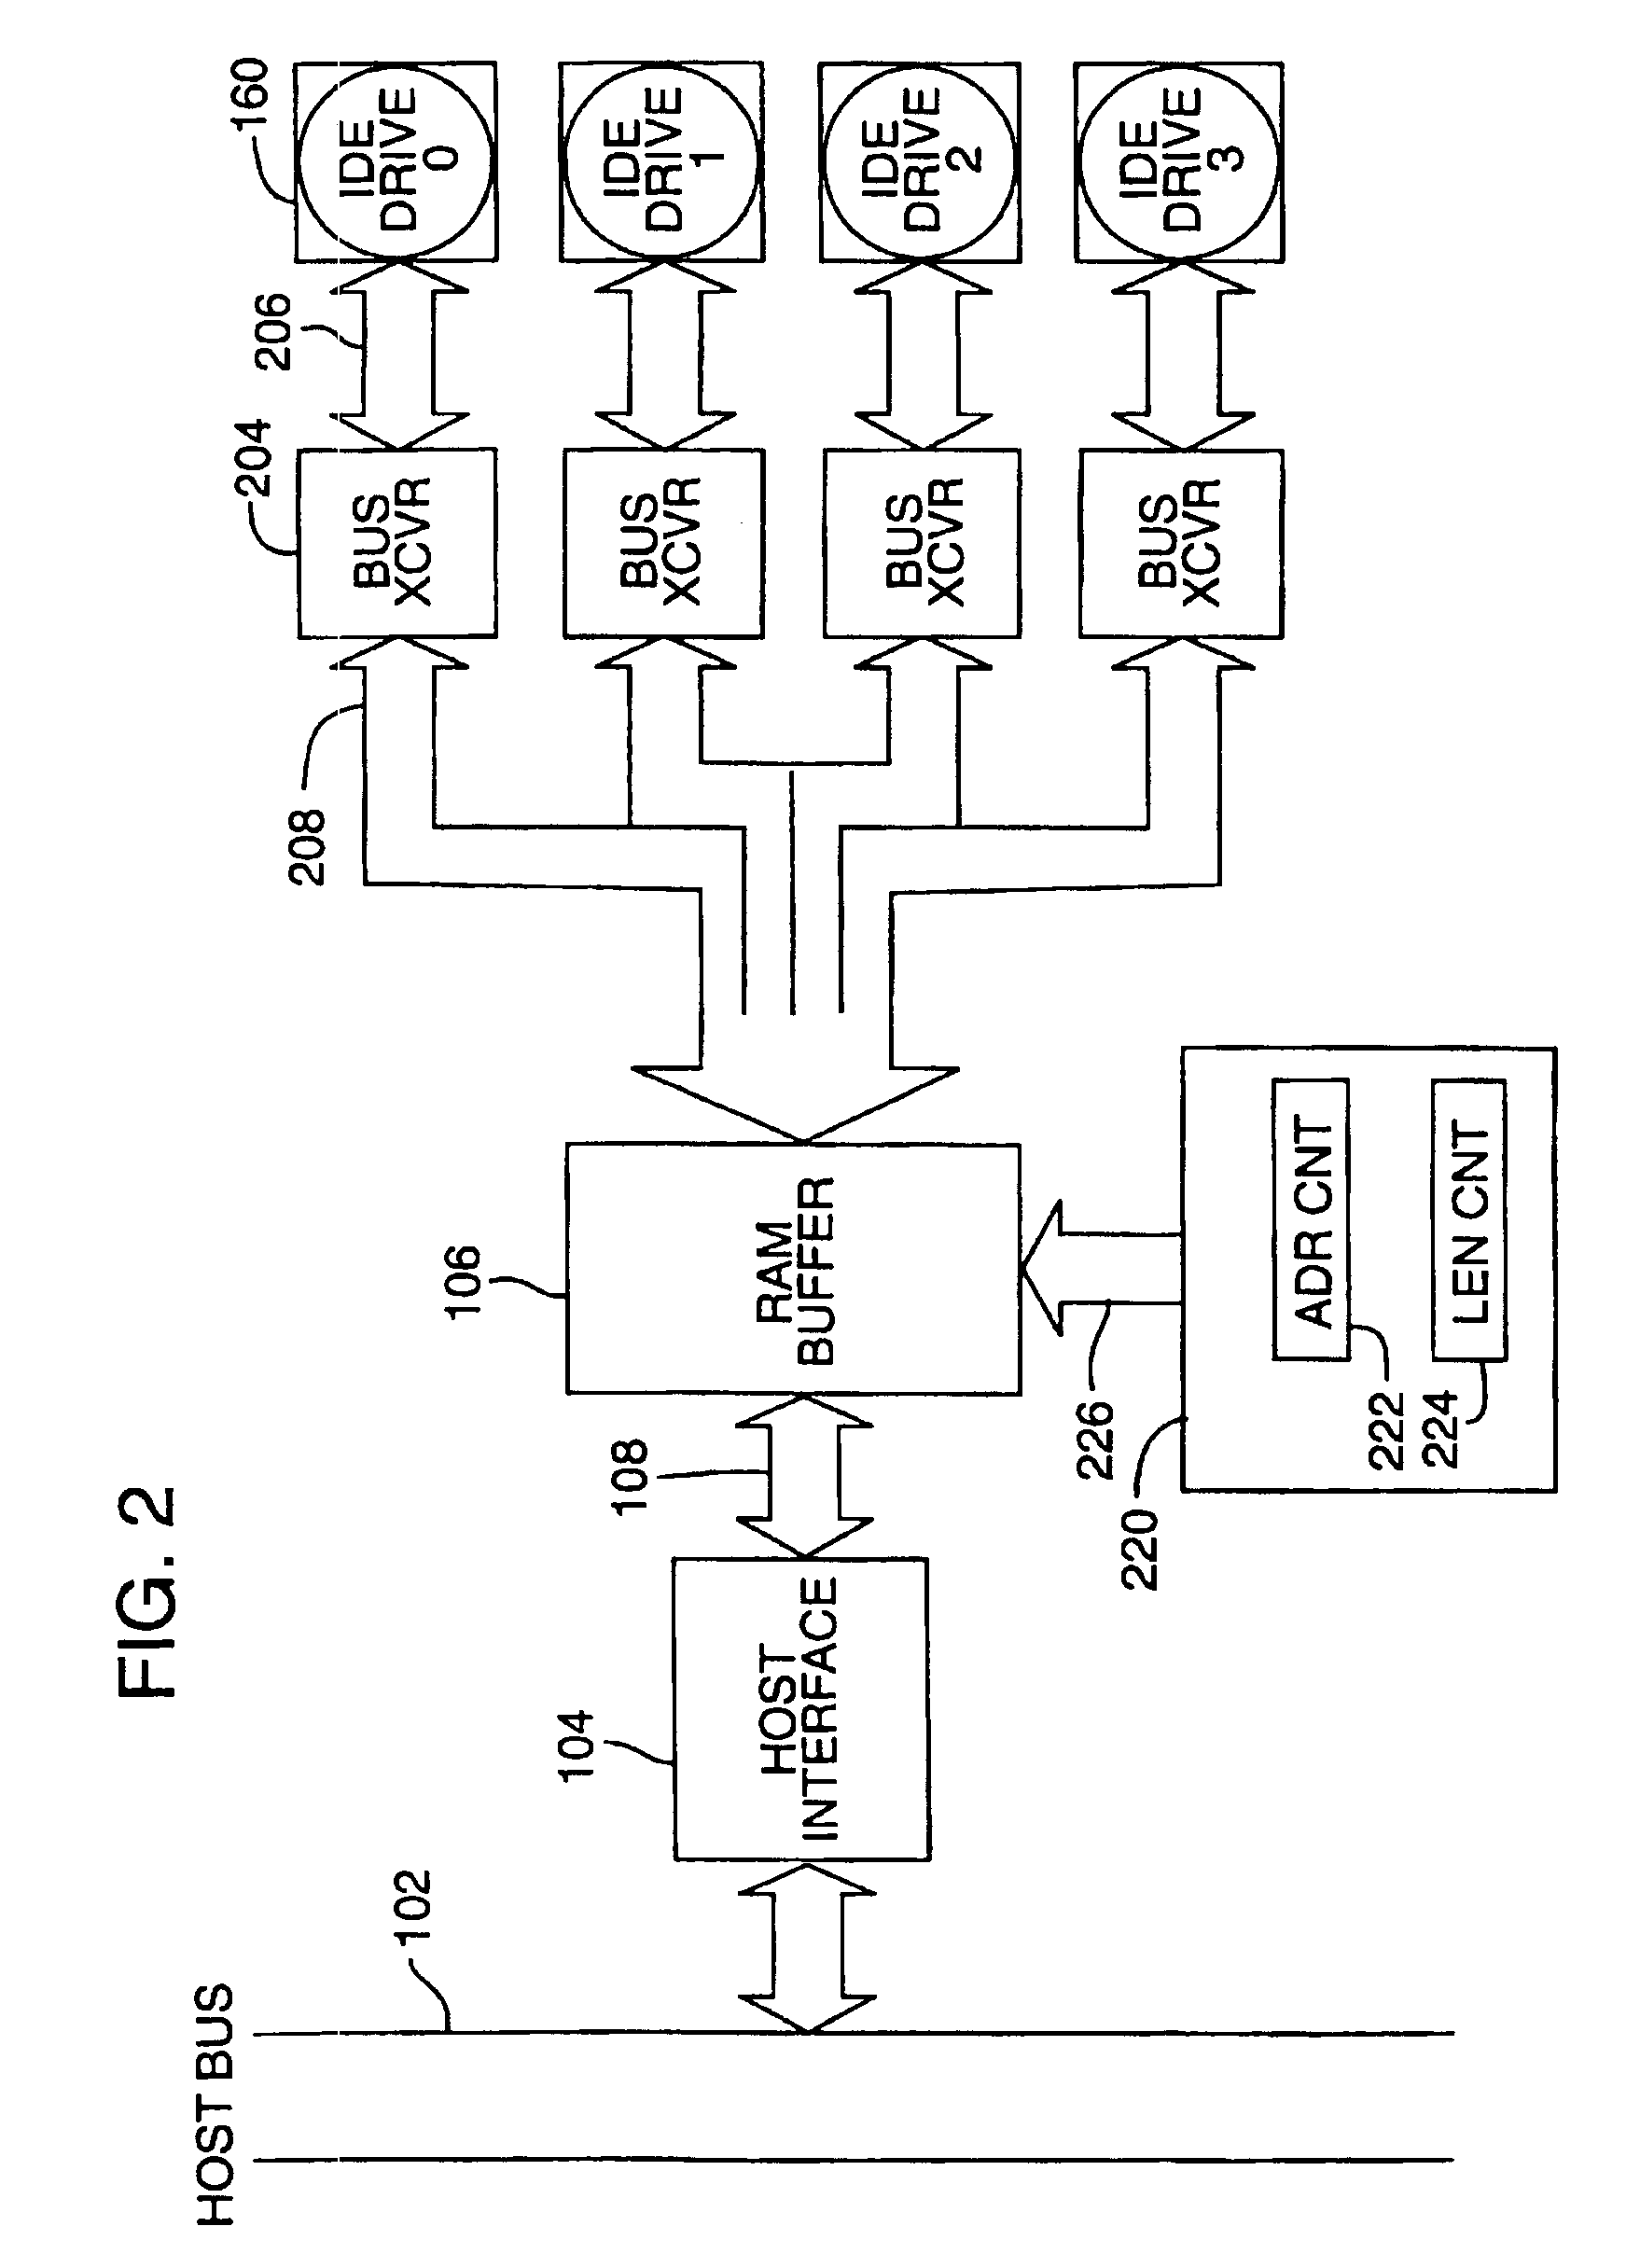 On-the-fly redundancy operation for forming redundant drive data and reconstructing missing data as data transferred between buffer memory and disk drives during write and read operation respectively